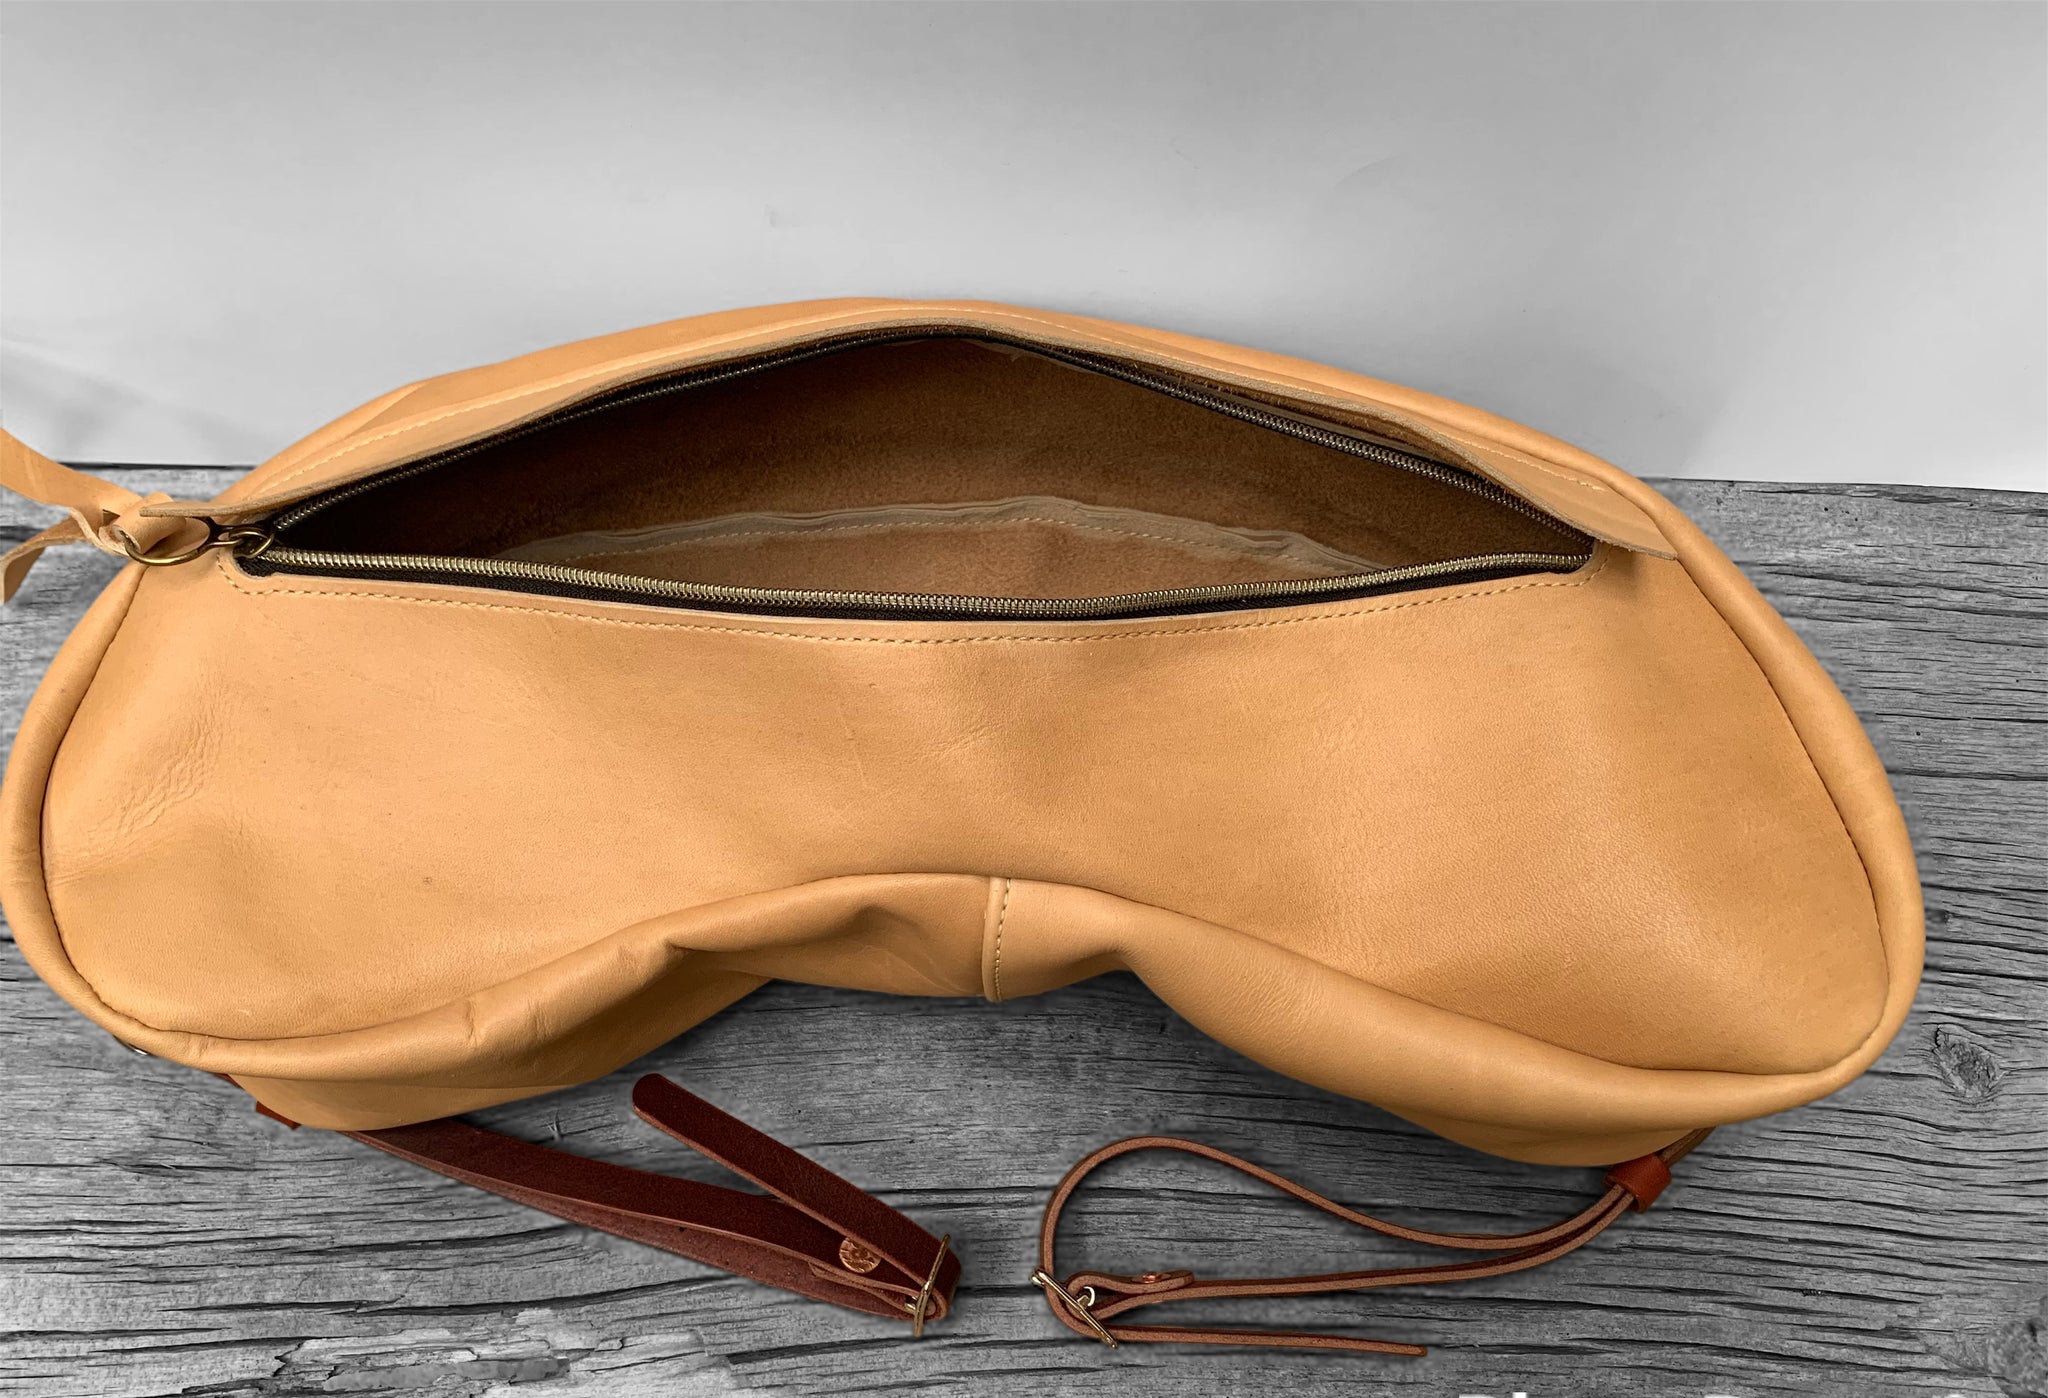 Cantle Bag, Banana Style - Saddle Color Chap Leather